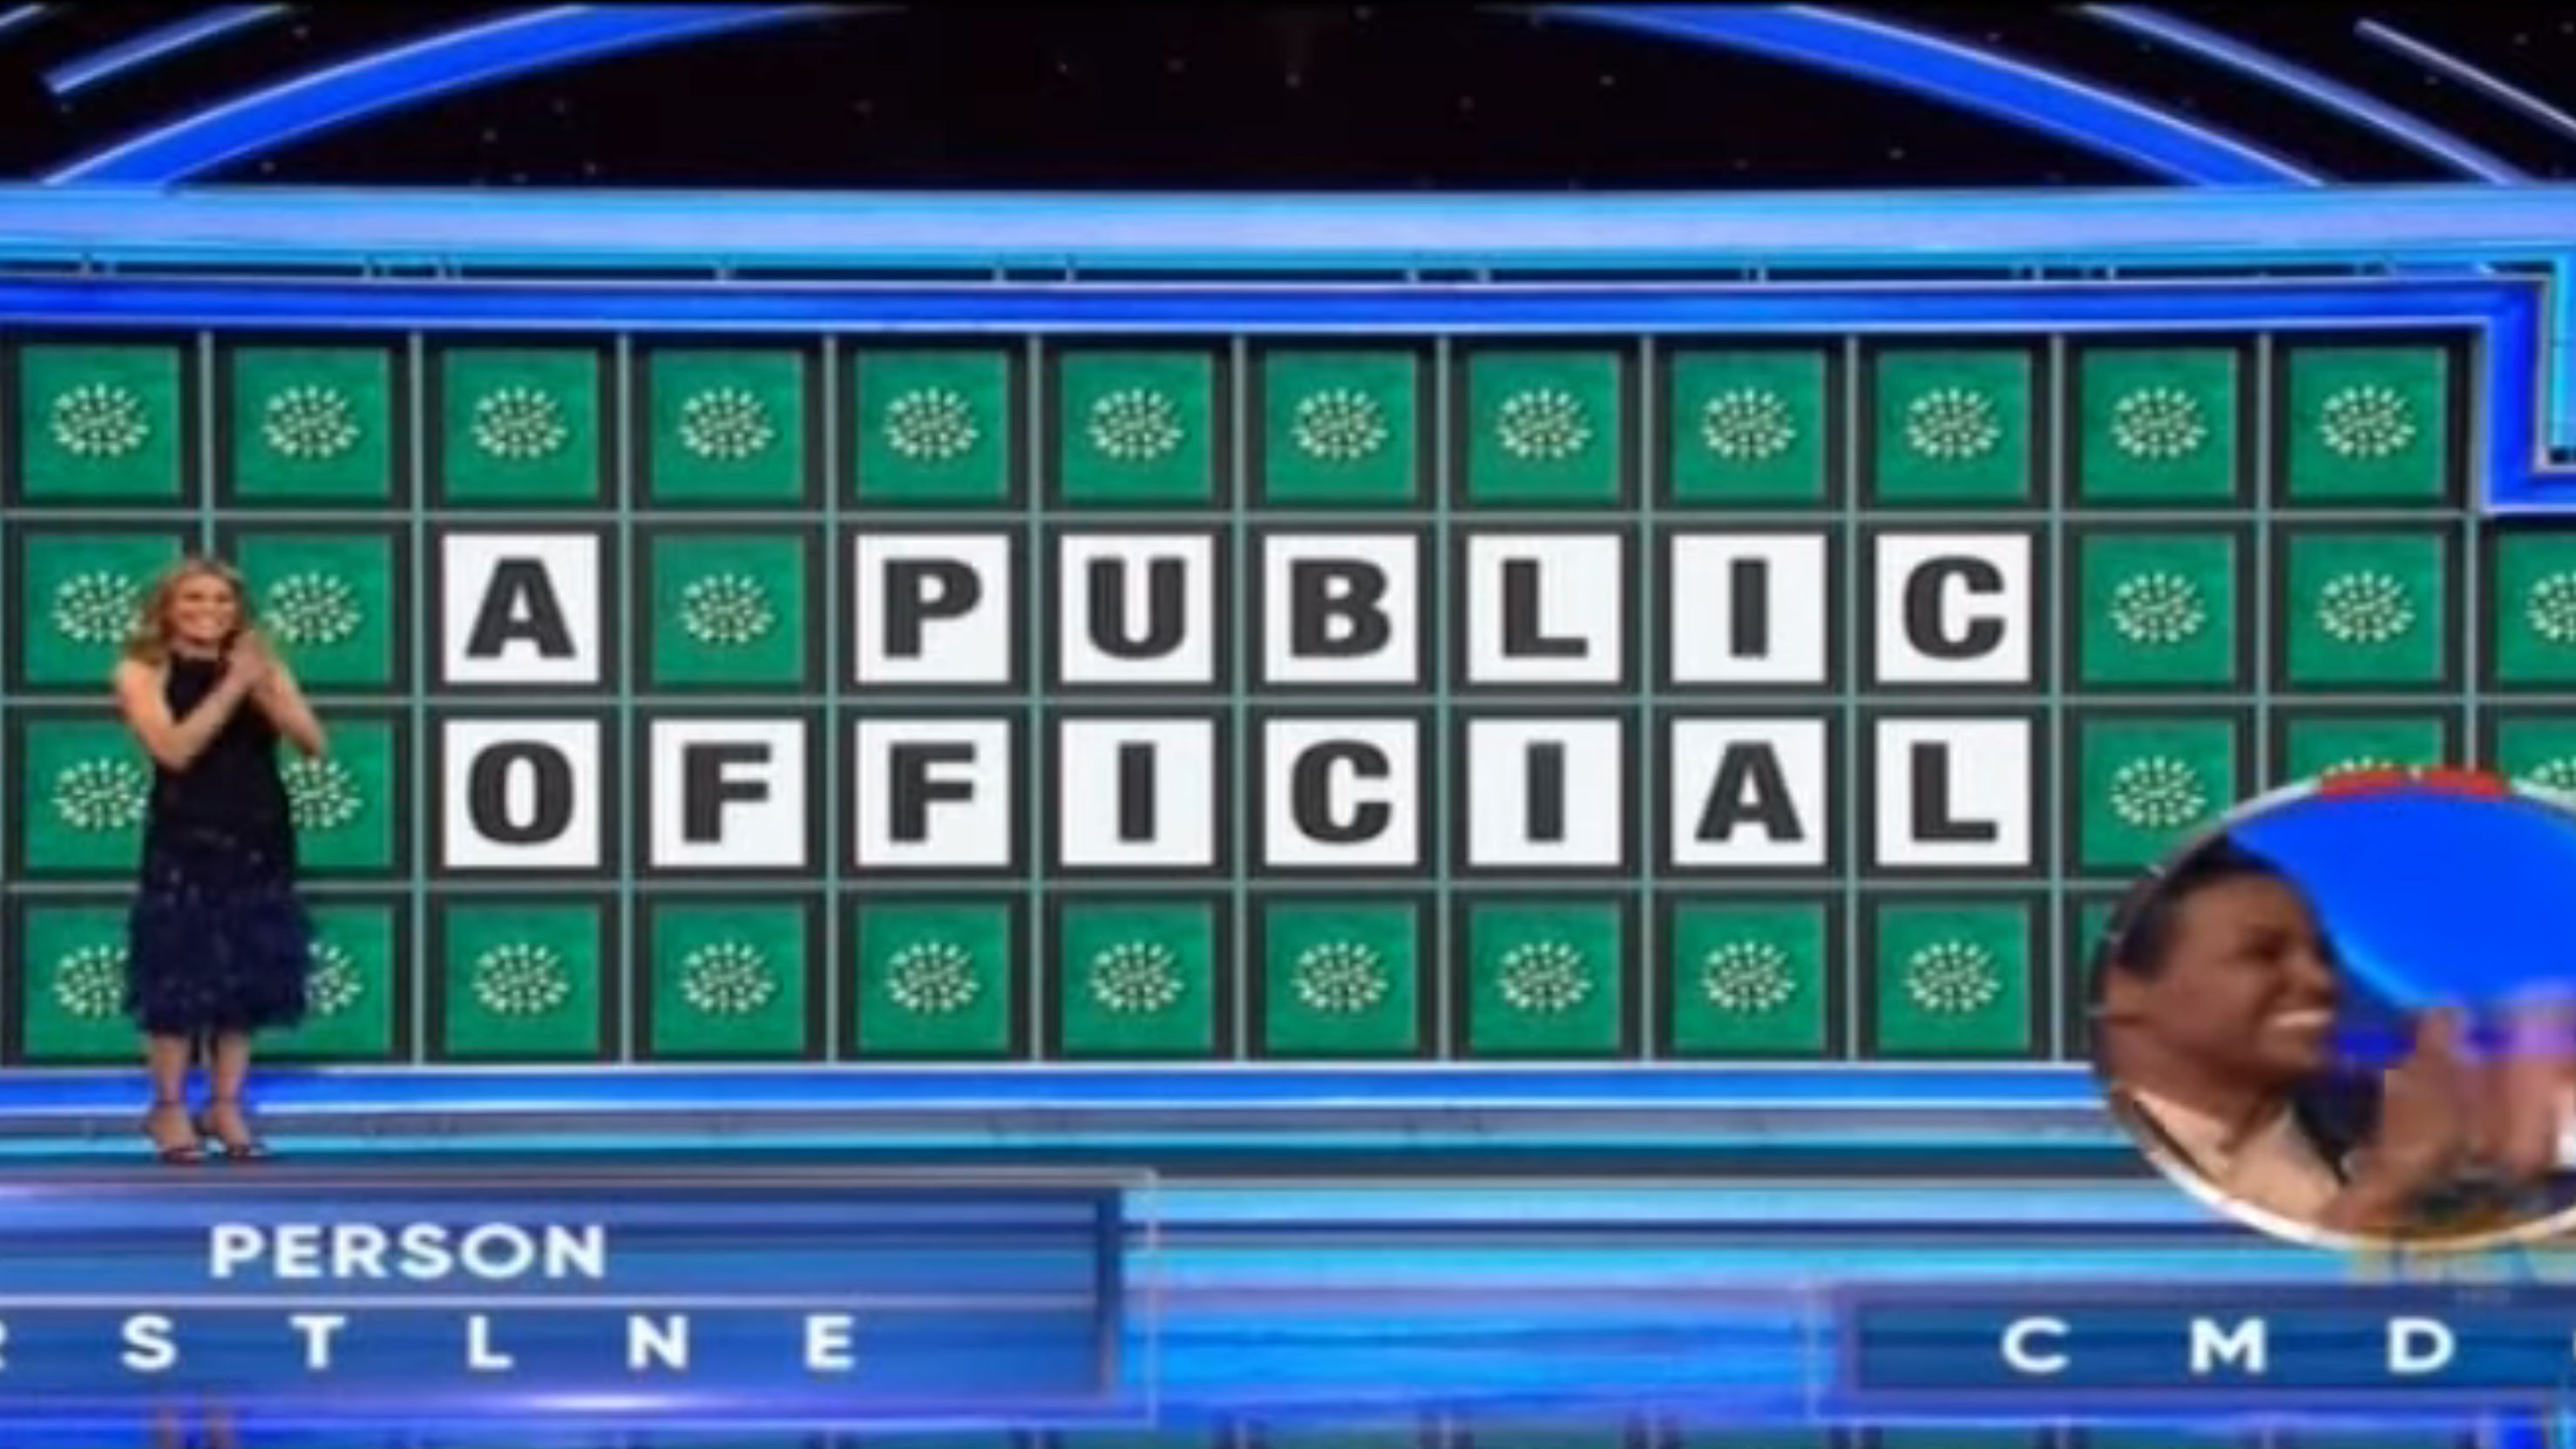 But she instantly guessed the correct answer as the audience roared